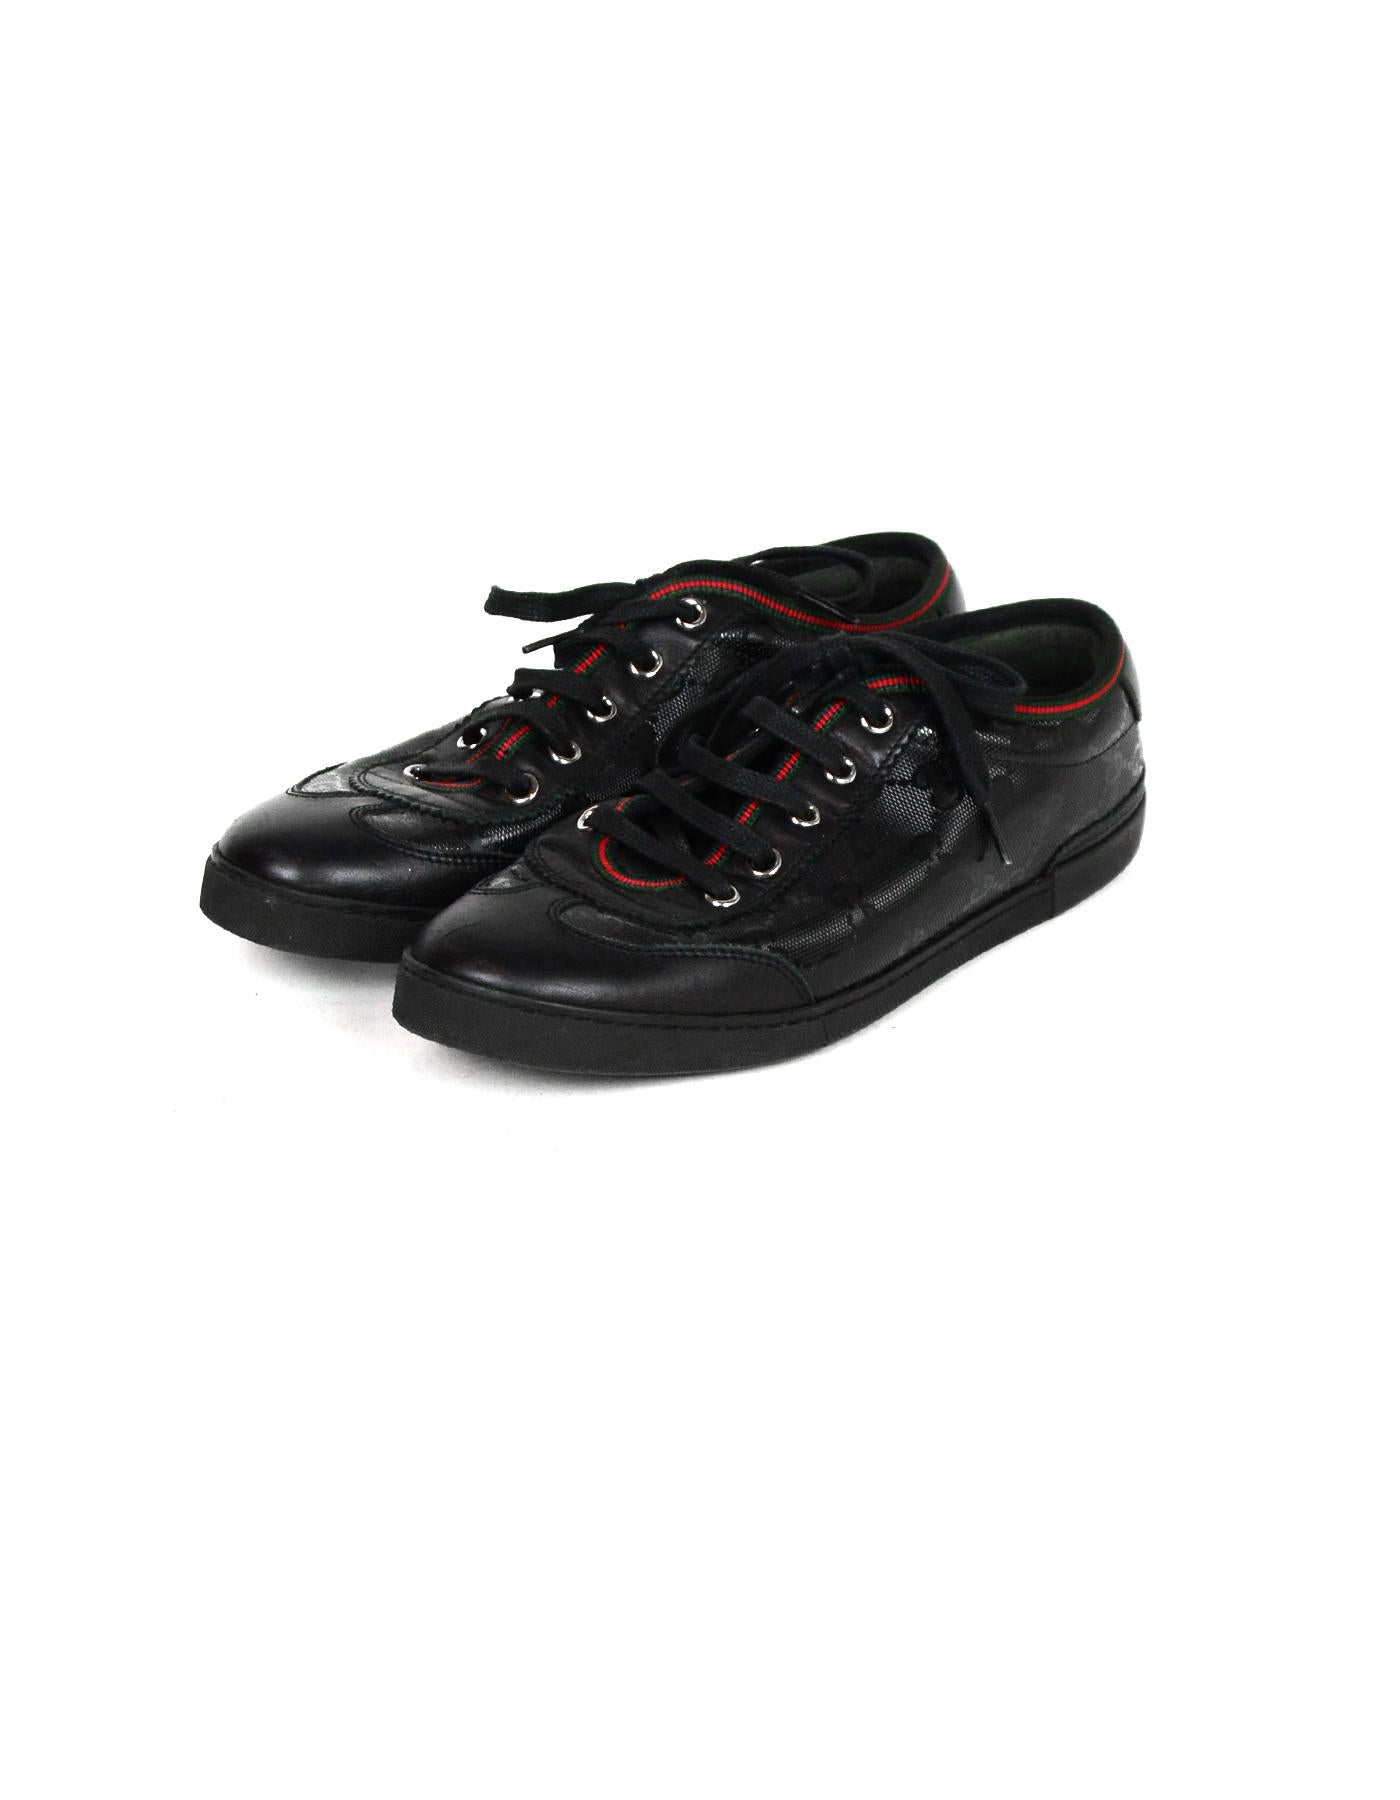 Gucci Black Monogram Sneakers w/ Leather Trim sz 36.5

Made In: Italy
Color: Black
Hardware: Silvertone
Materials: Leather
Closure/Opening: Front Laces
Overall Condition: Excellent pre-owned condition, minor wear on the soles and small scuffs on the